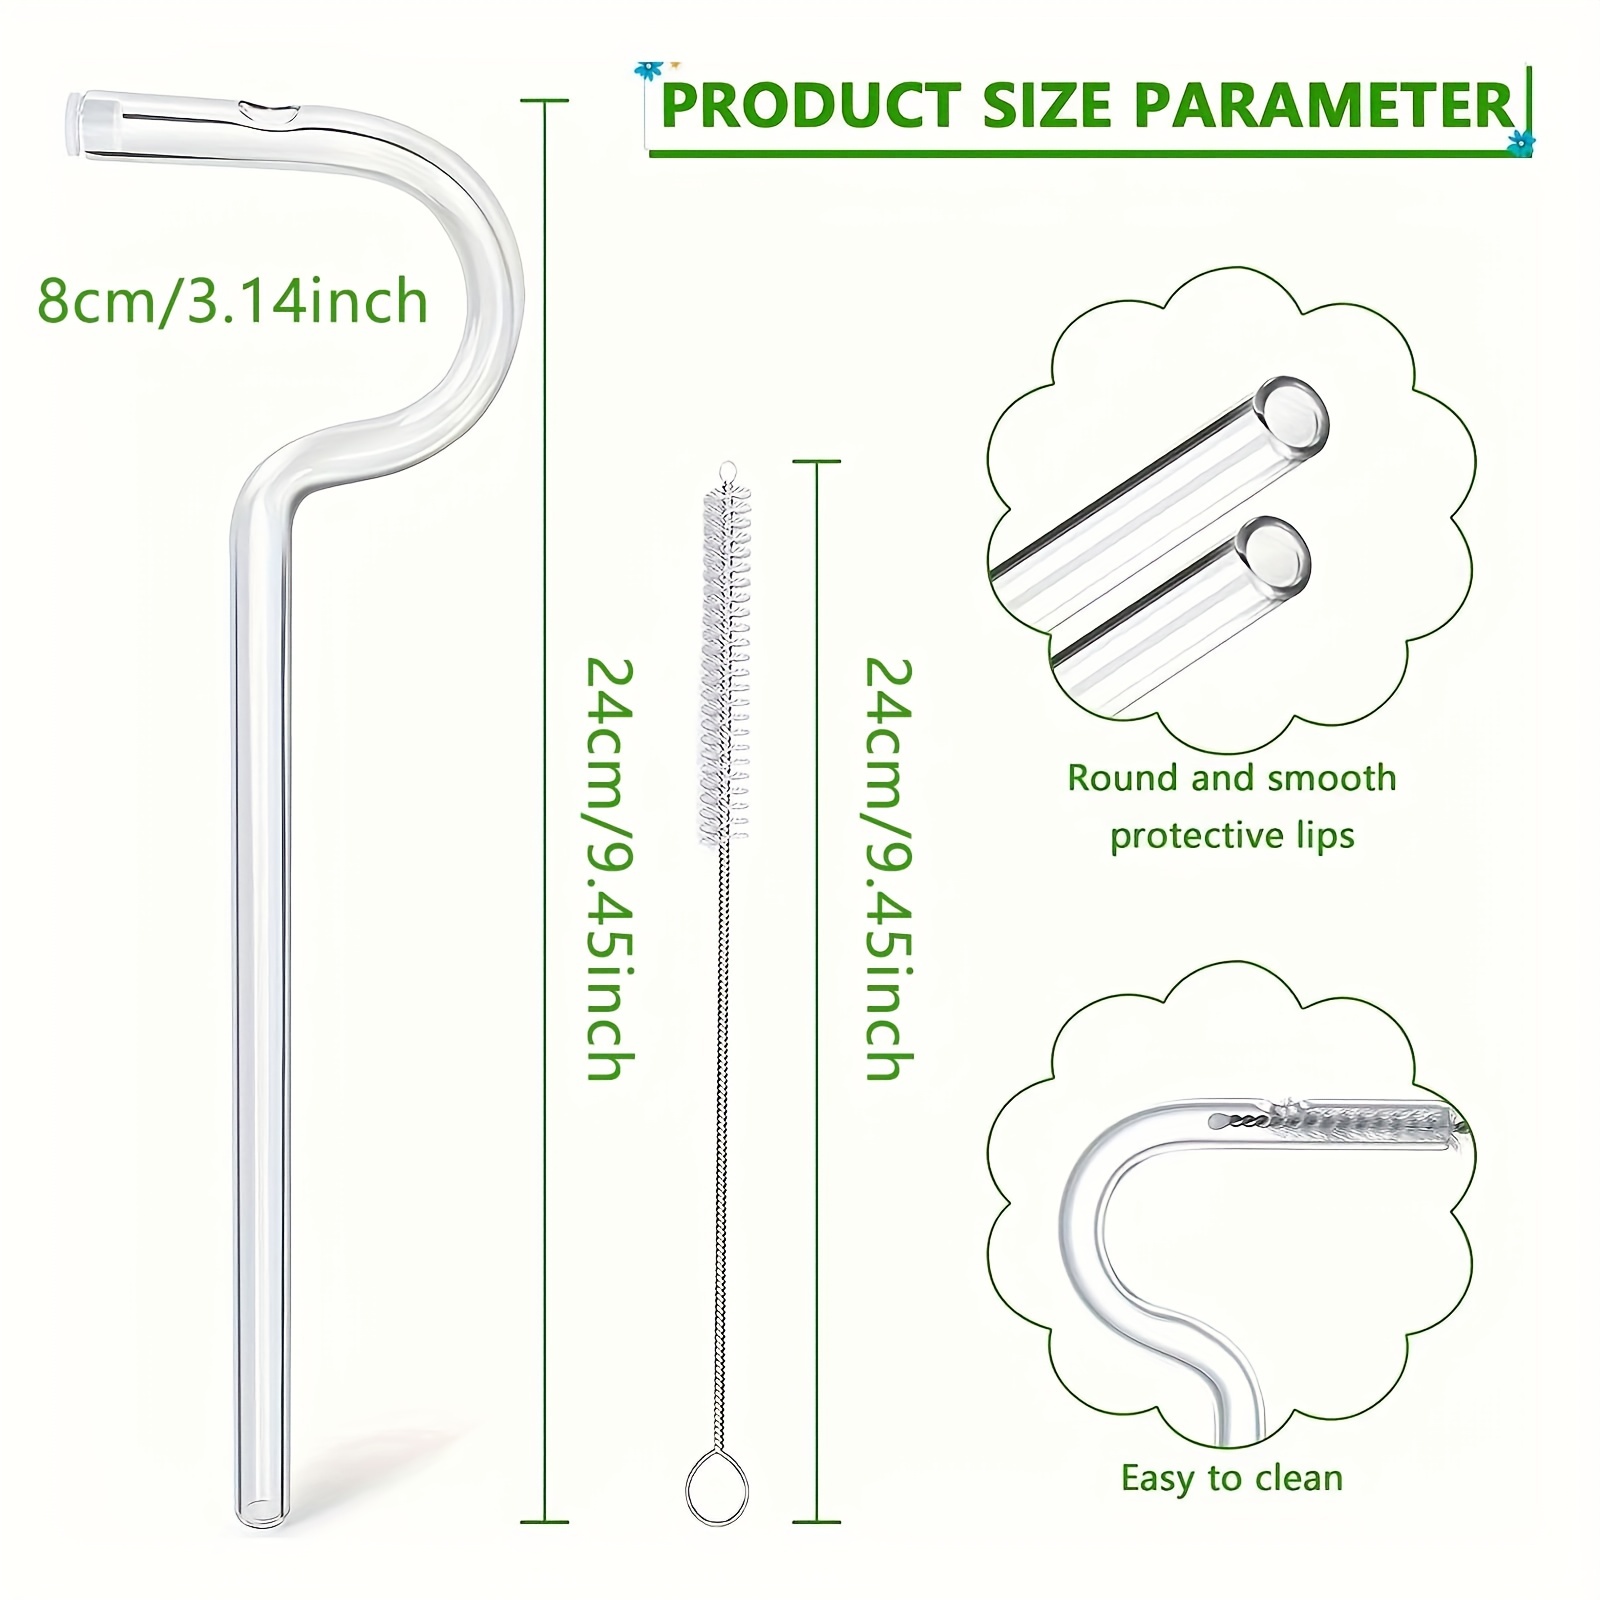 2pcs Anti-Wrinkle Straw,Lip Straw for Wrinkles,Reusable Anti Wrinkle  Drinking Straw Stainless Steel Straw,Anti-wrinkle for engaging lips  horizontally,with 1 brush